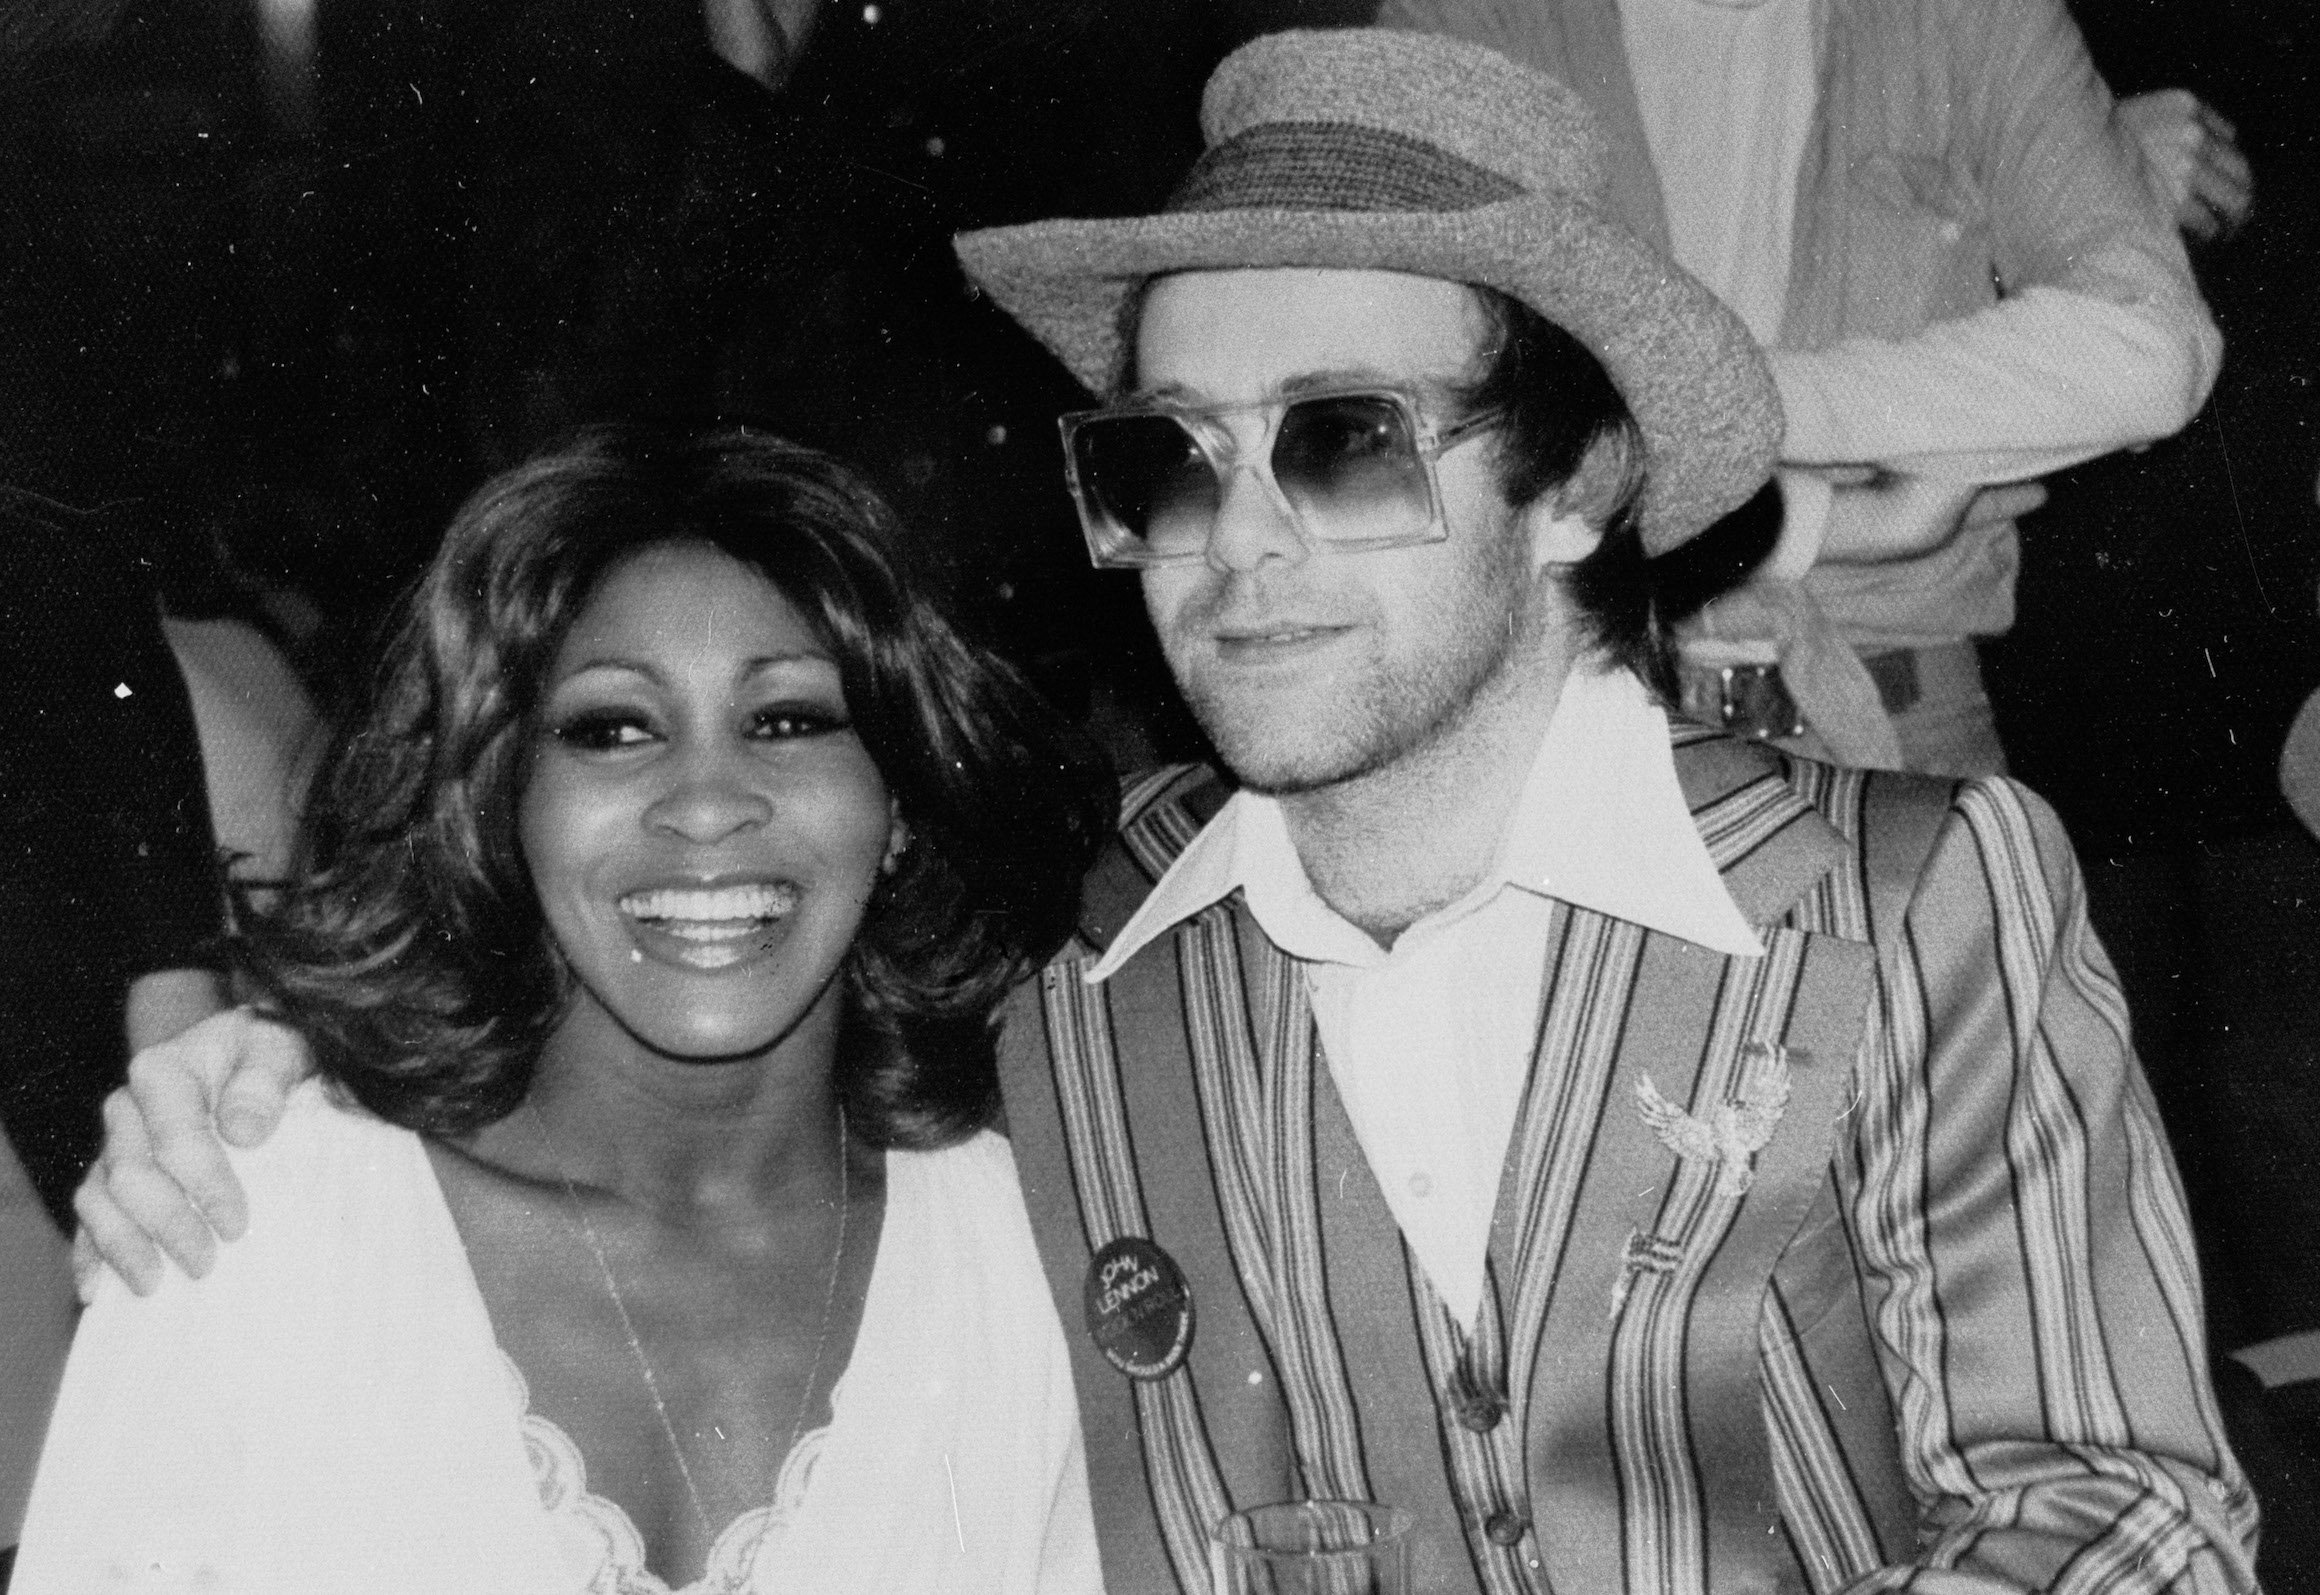 Tina Turner and Elton John at a press conference in New York City in 1975